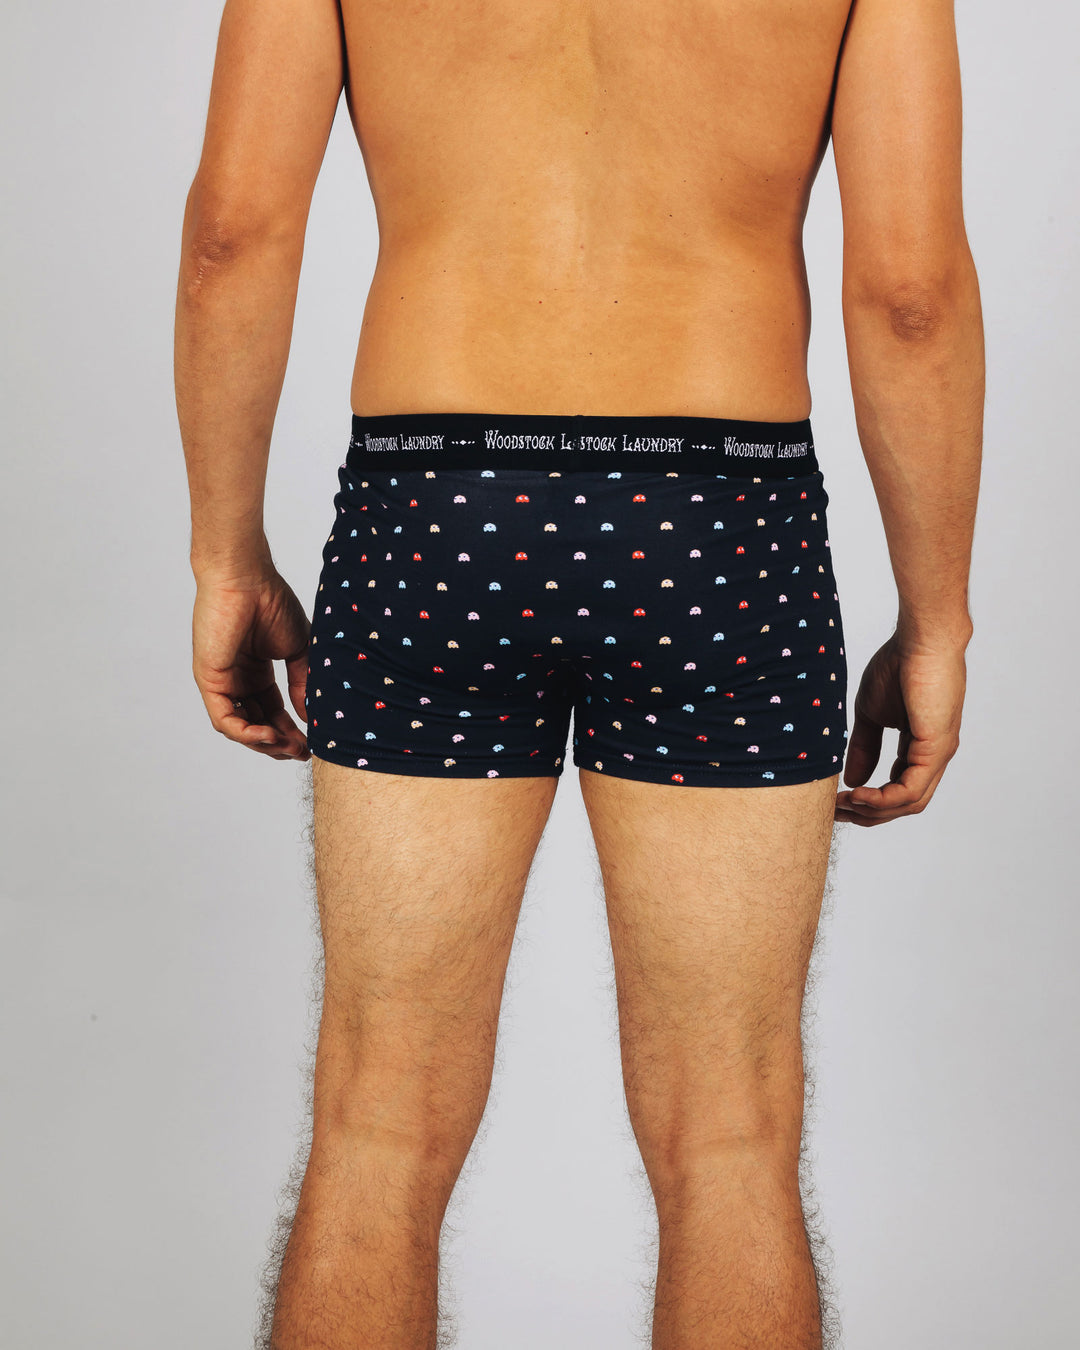 Mens Boxer Briefs P-Ghost Back - Woodstock Laundry